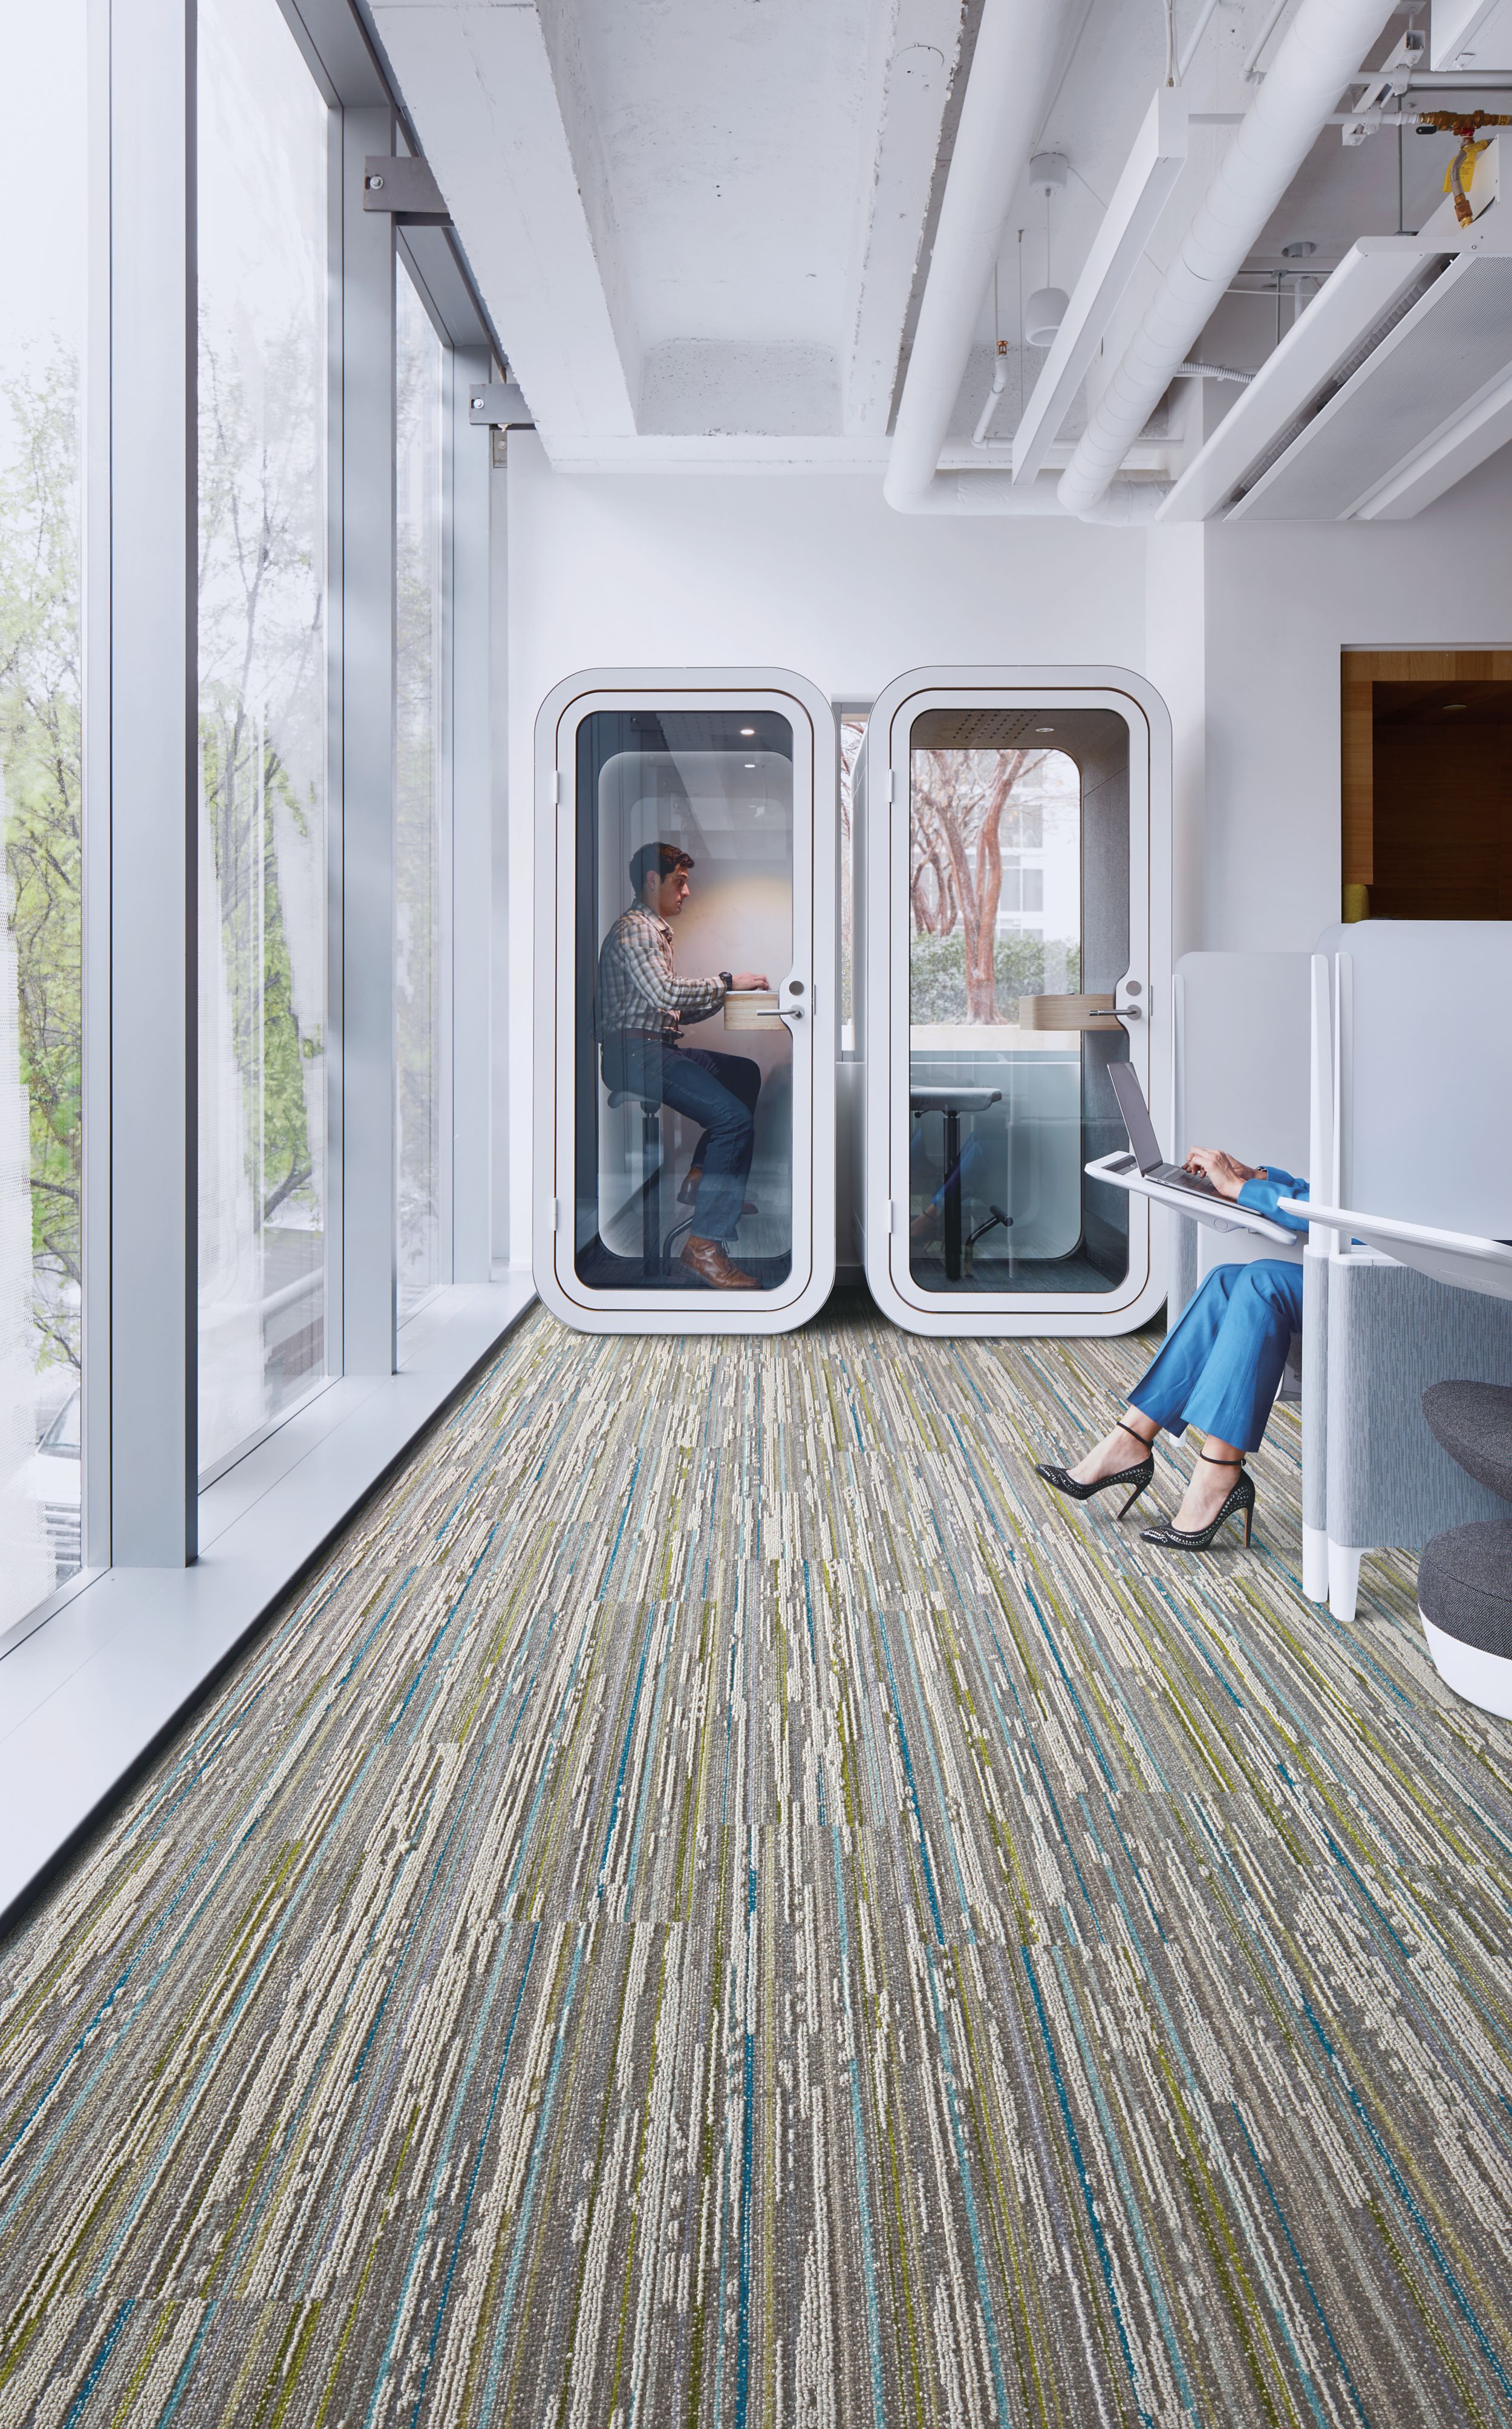 Interface Video Spectrum carpet tile in office common area showing work spaces image number 1